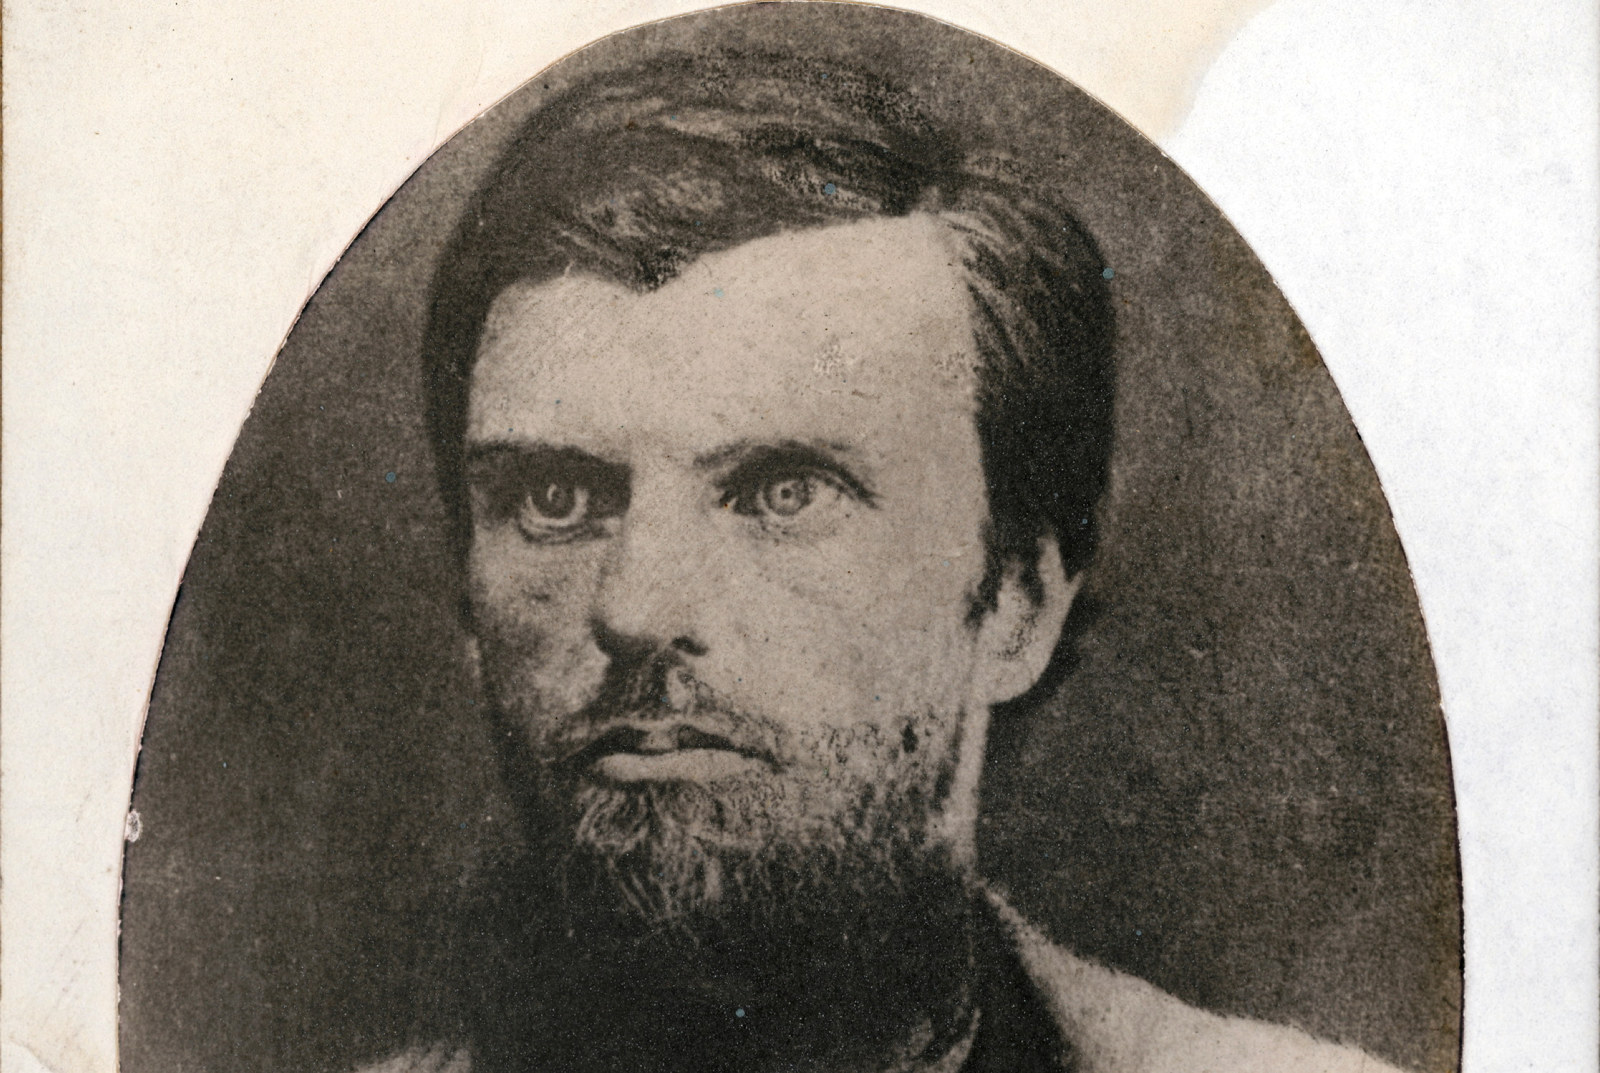 Cropped version of photo portrait of bearded man, mounted on card.